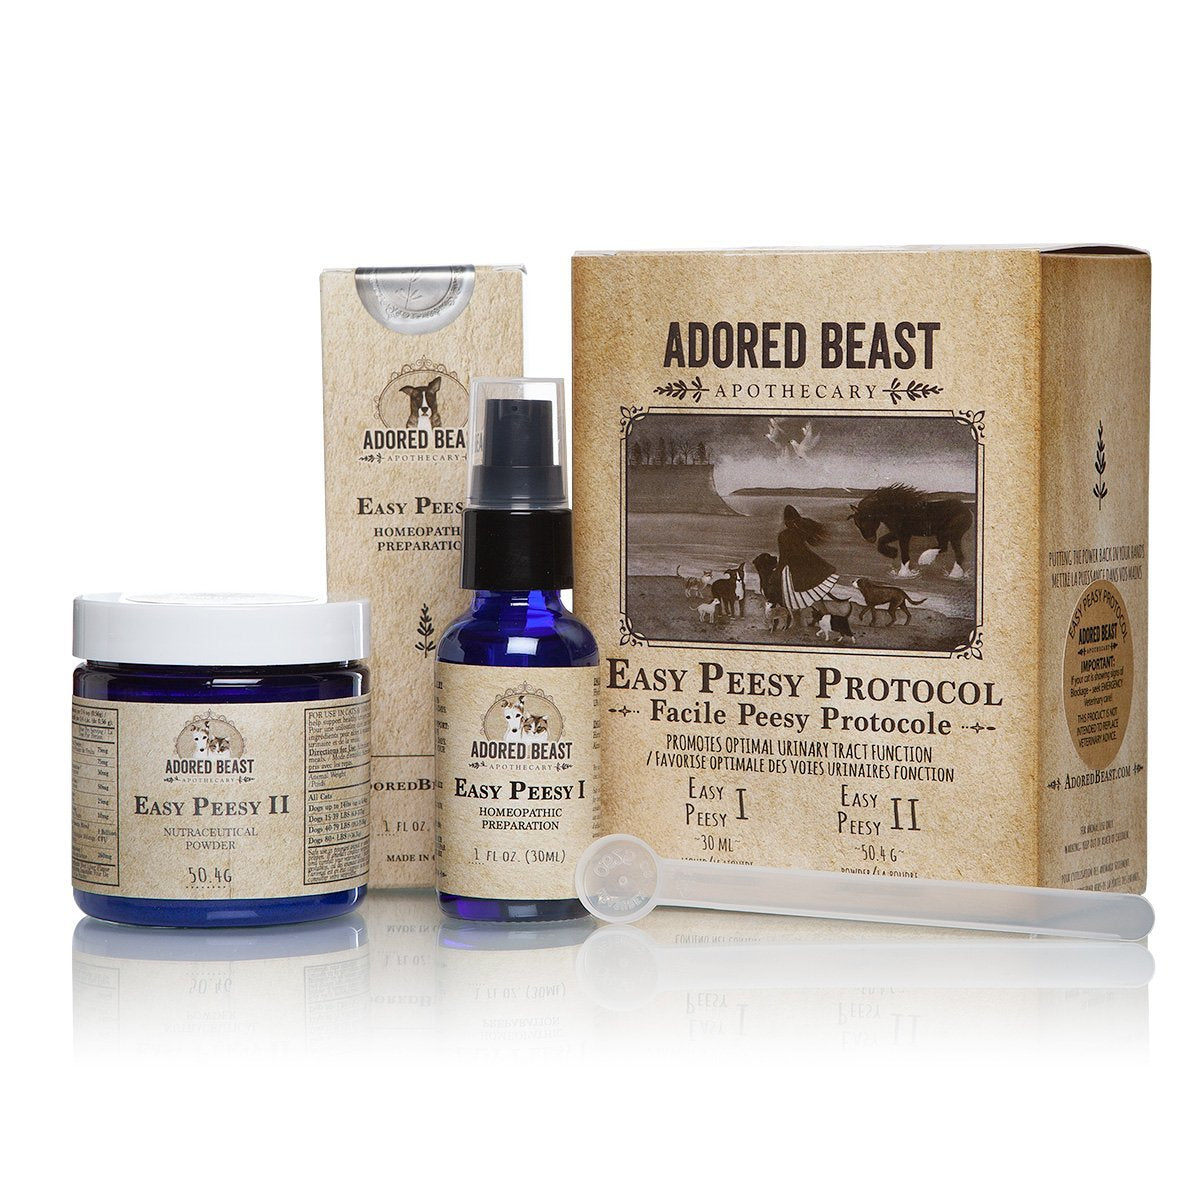 Adored Beast Apothecary Easy Peesy Protocol | Two Product Kit for Urinary Tract Function